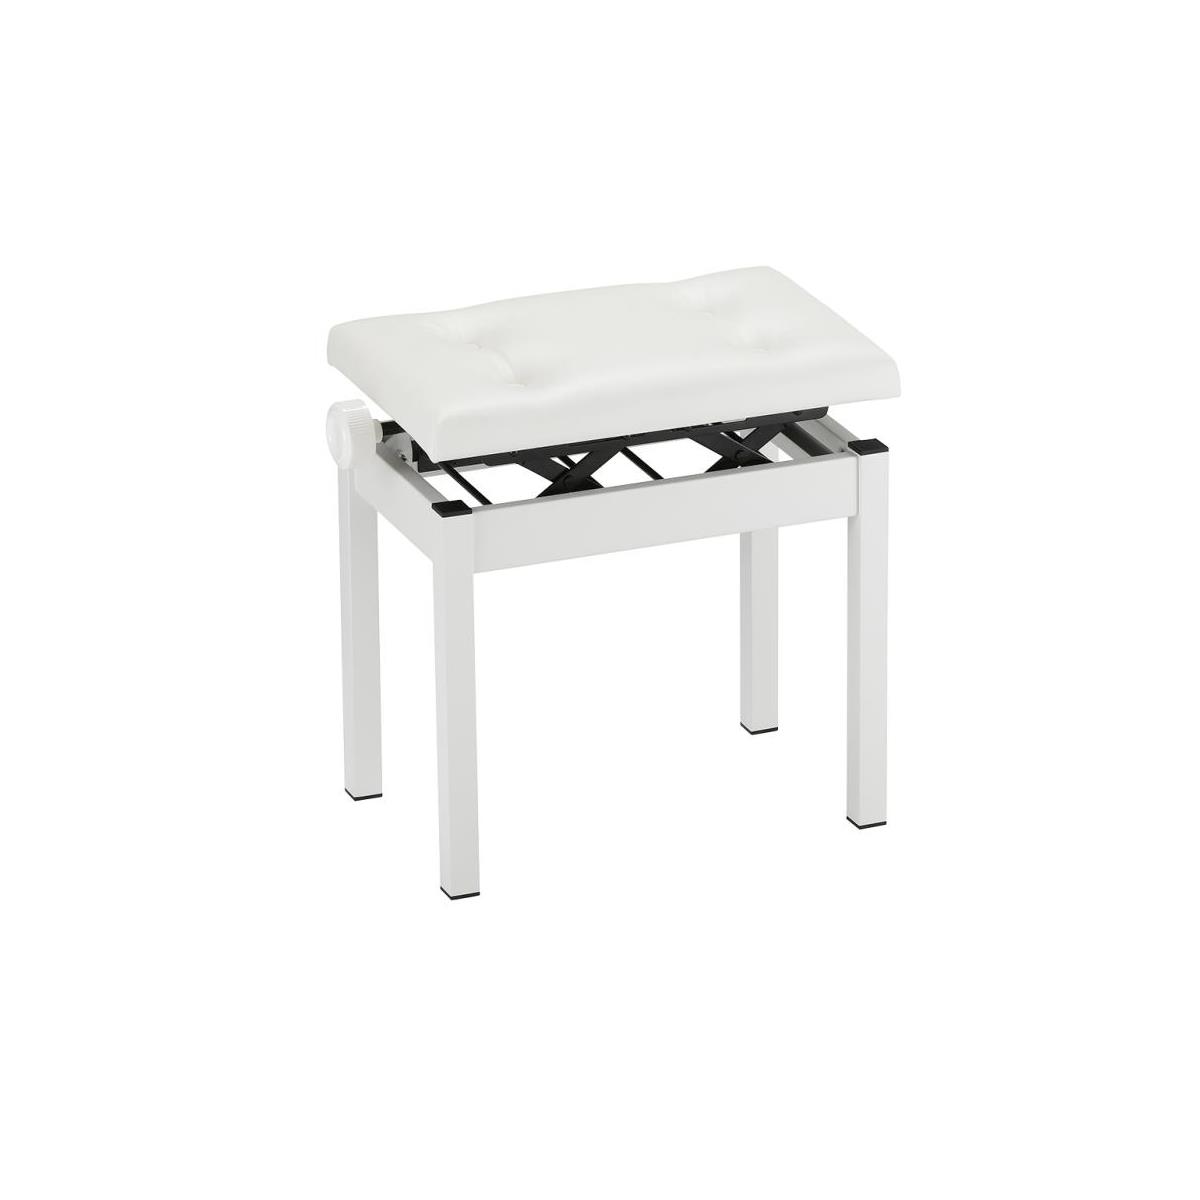 Image of Korg PC-550 Height Adjustable Piano Bench